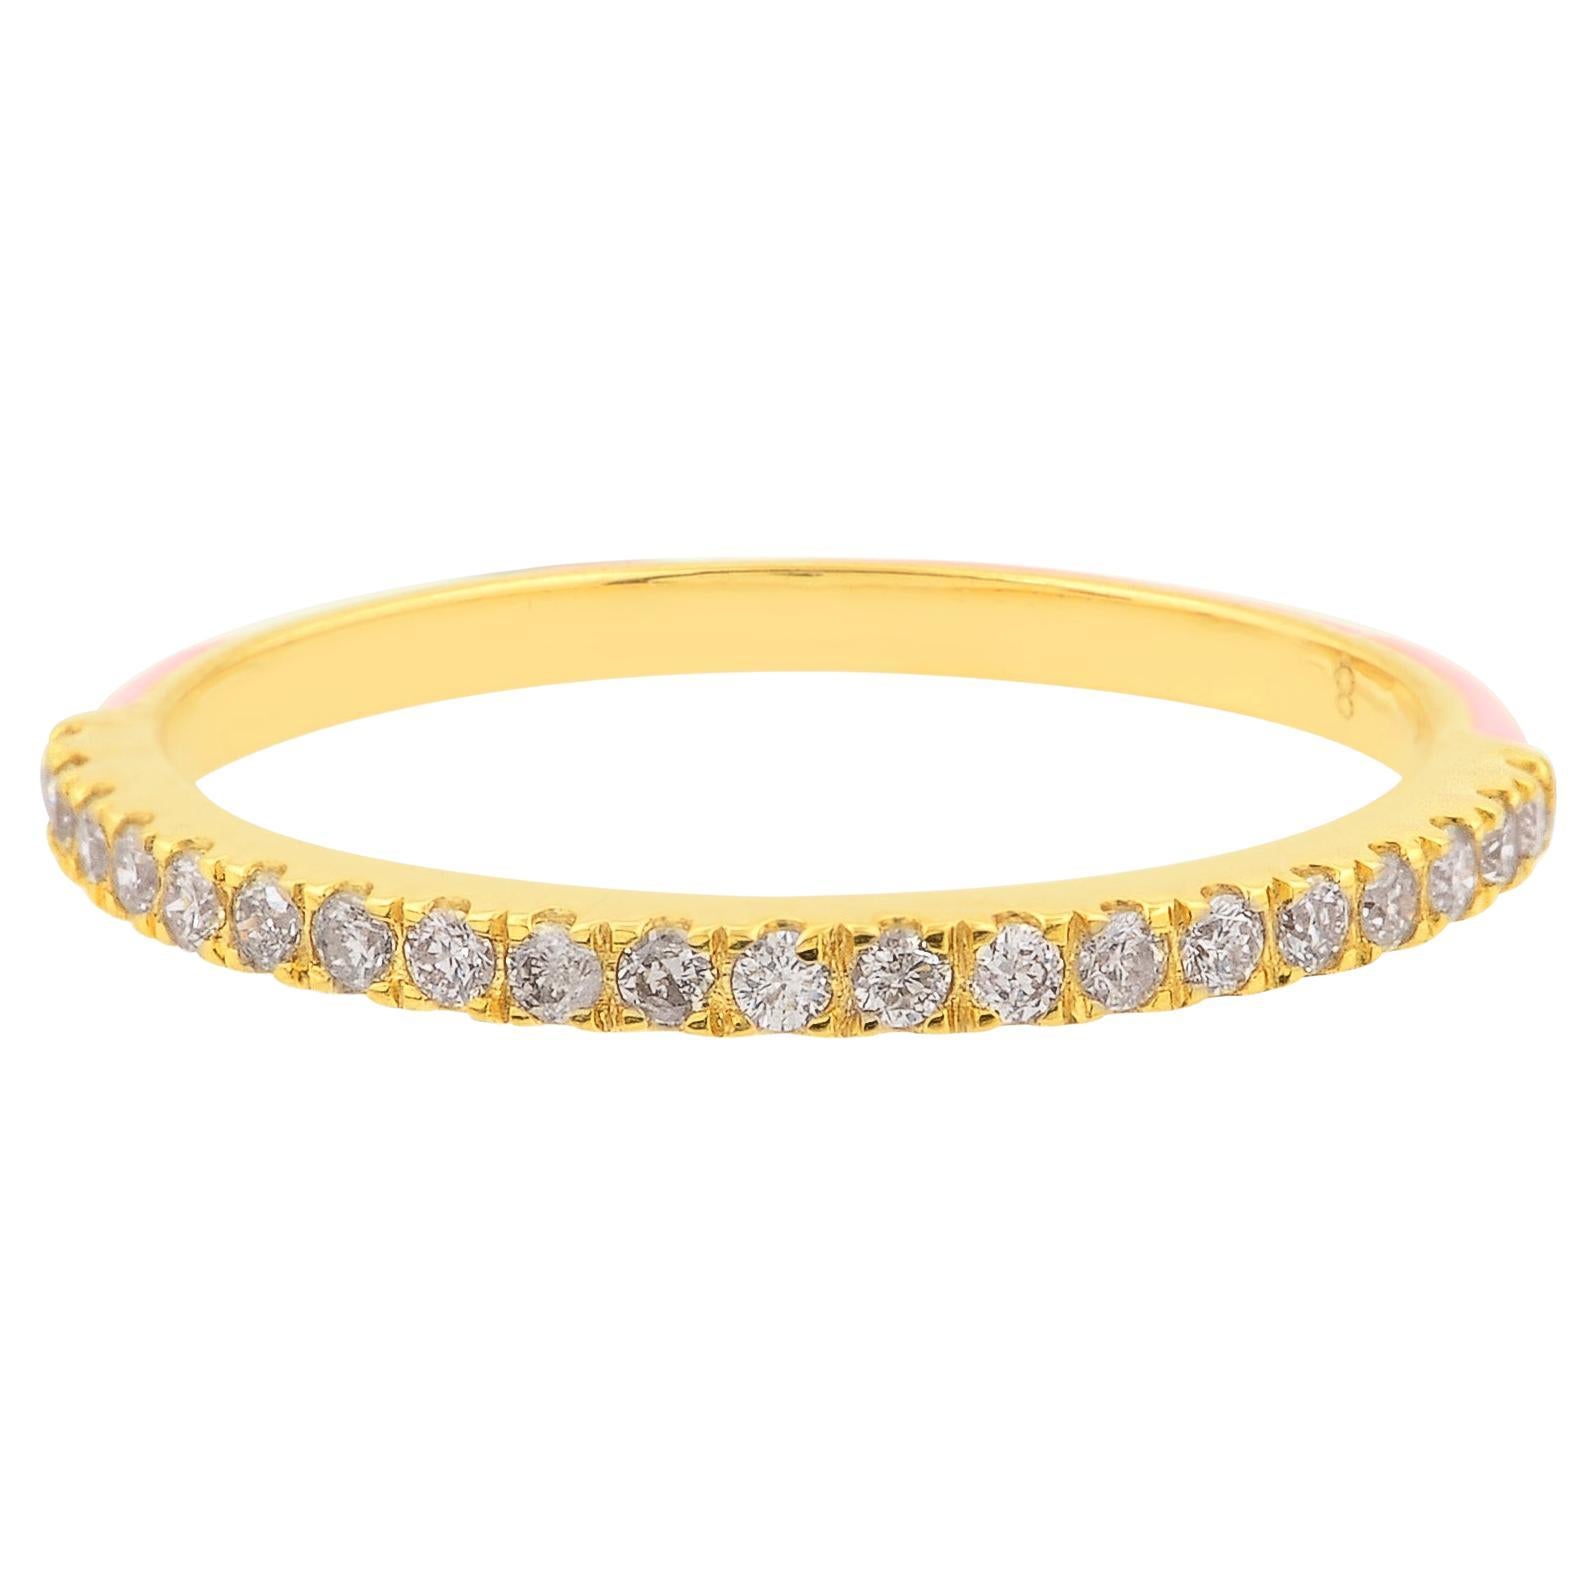 For Sale:  0.22 Carat Diamond Pave Half Band Ring Solid 18k Yellow Gold Enamel Fine Jewelry